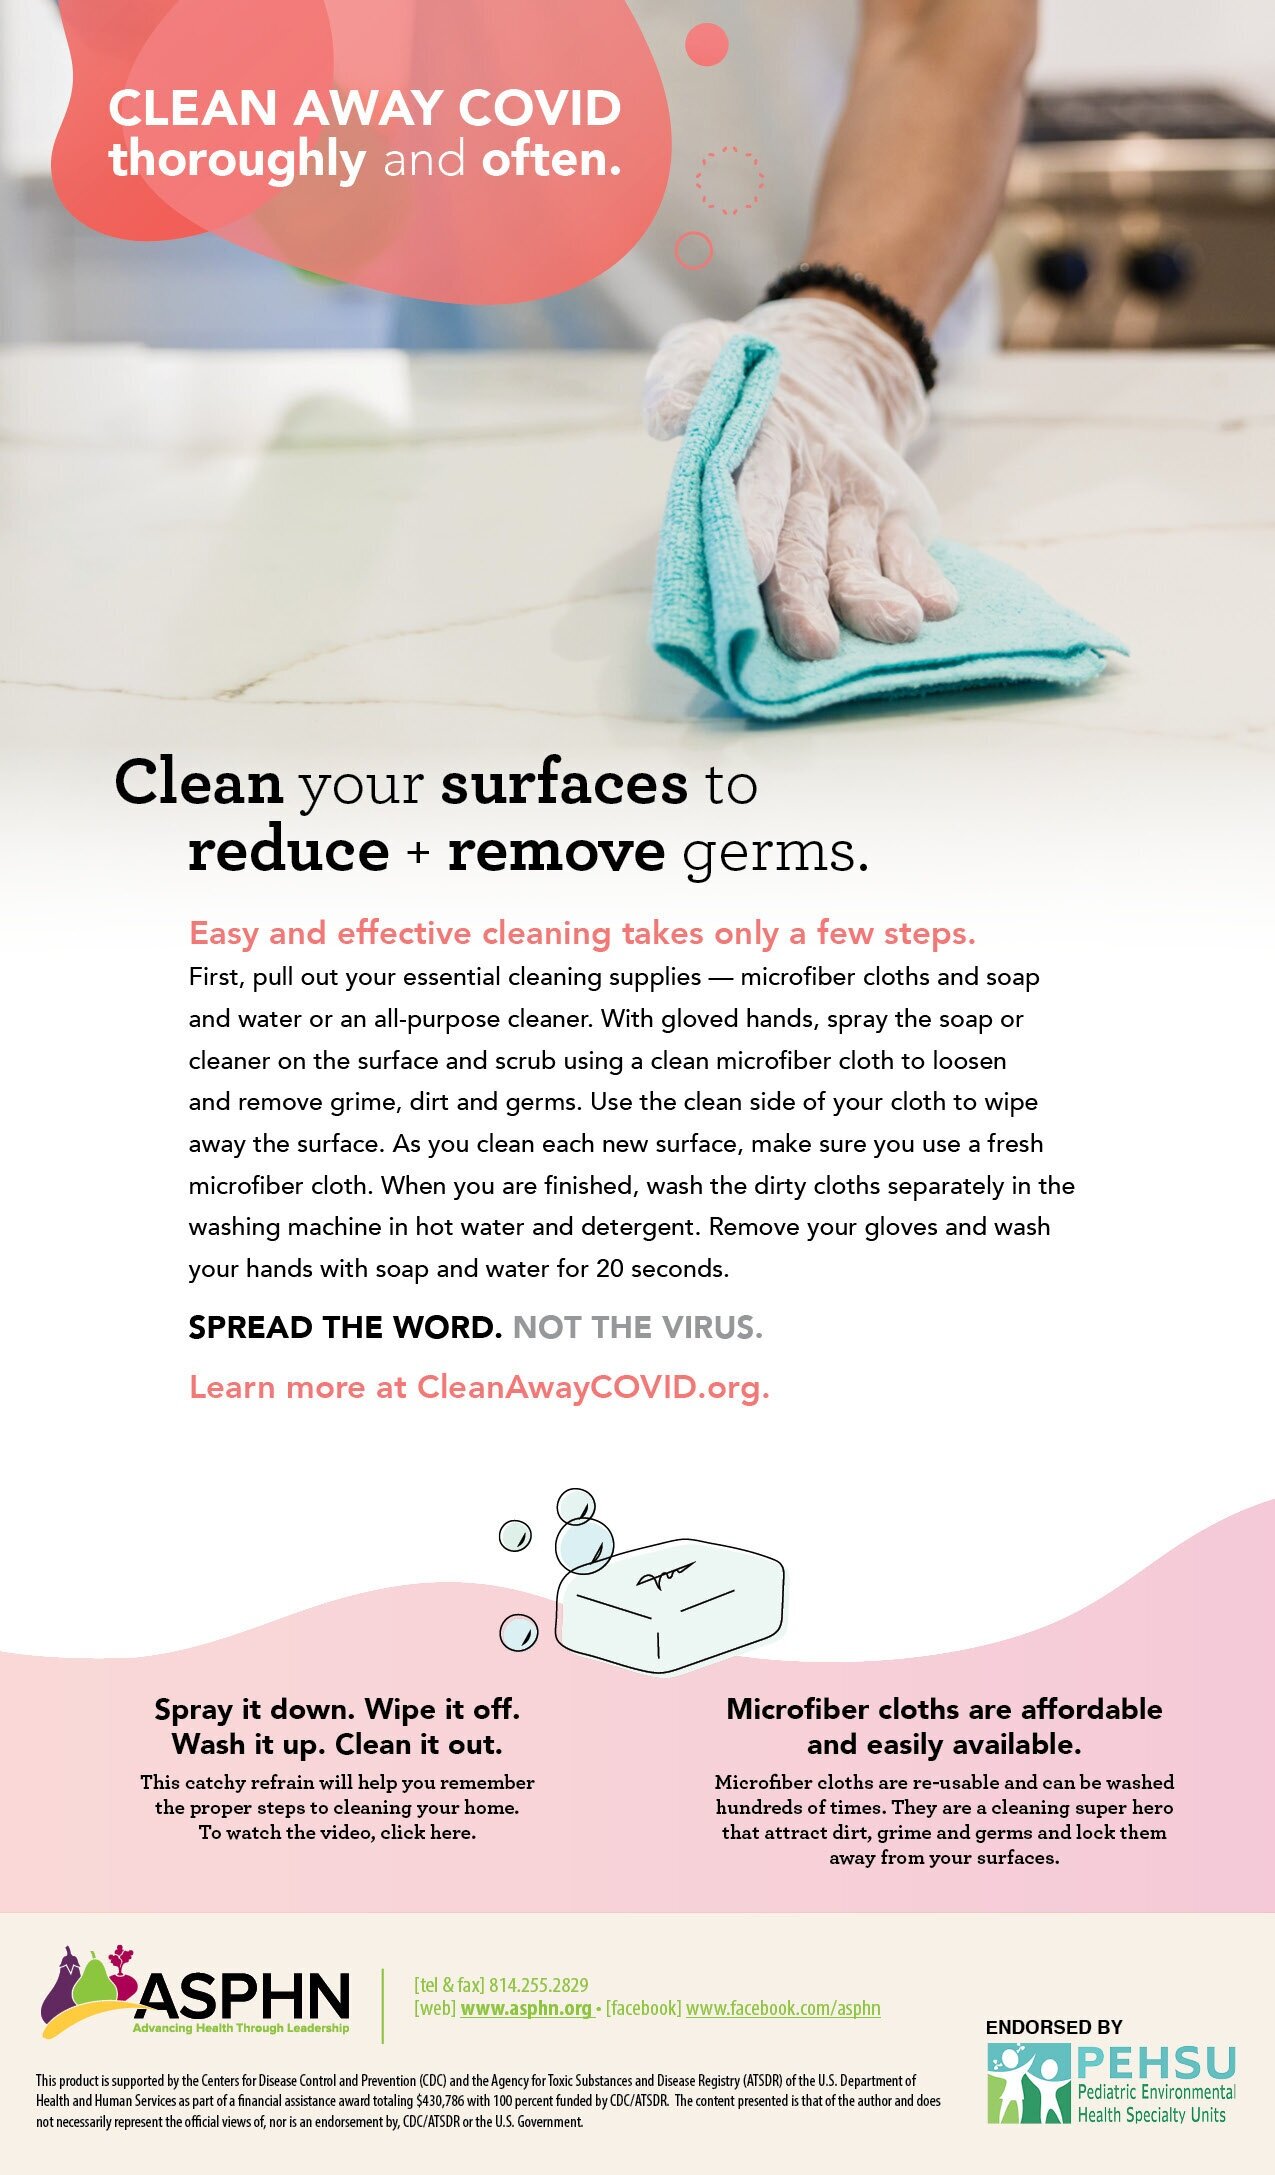 How to Disinfect Everything: Coronavirus Home Cleaning Tips (2022)